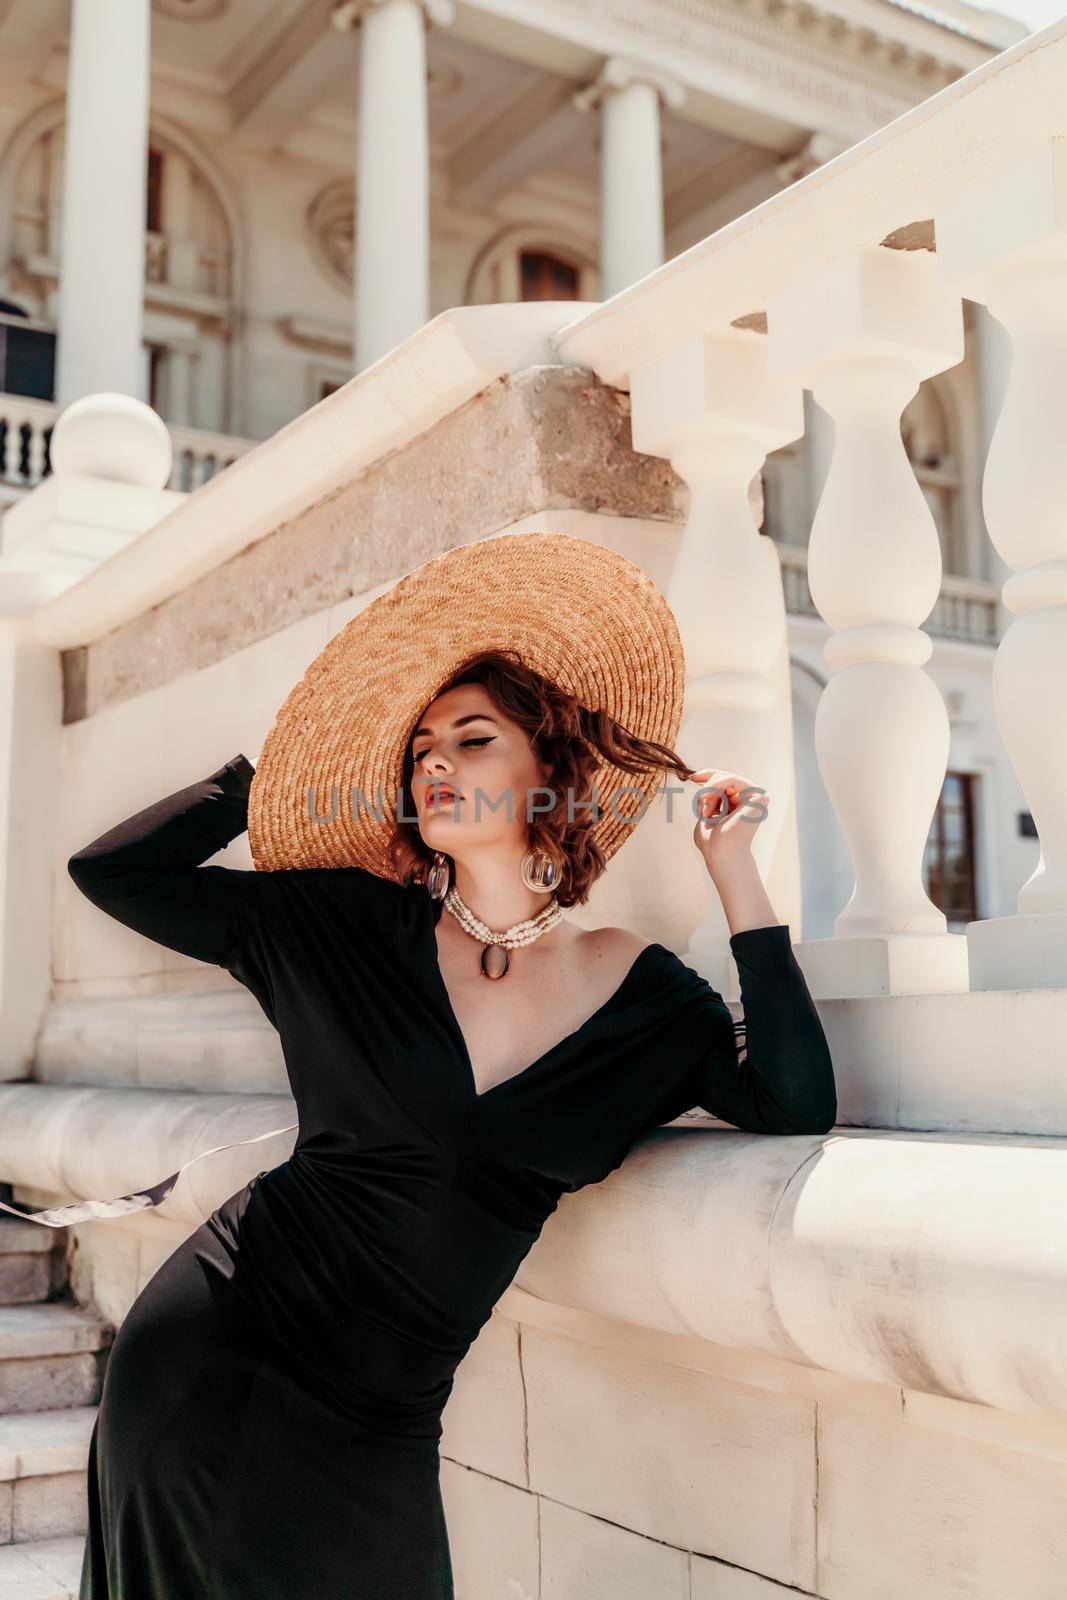 Fashion photo of a beautiful model in an elegant hat and black dress posing against the backdrop of a building with columns